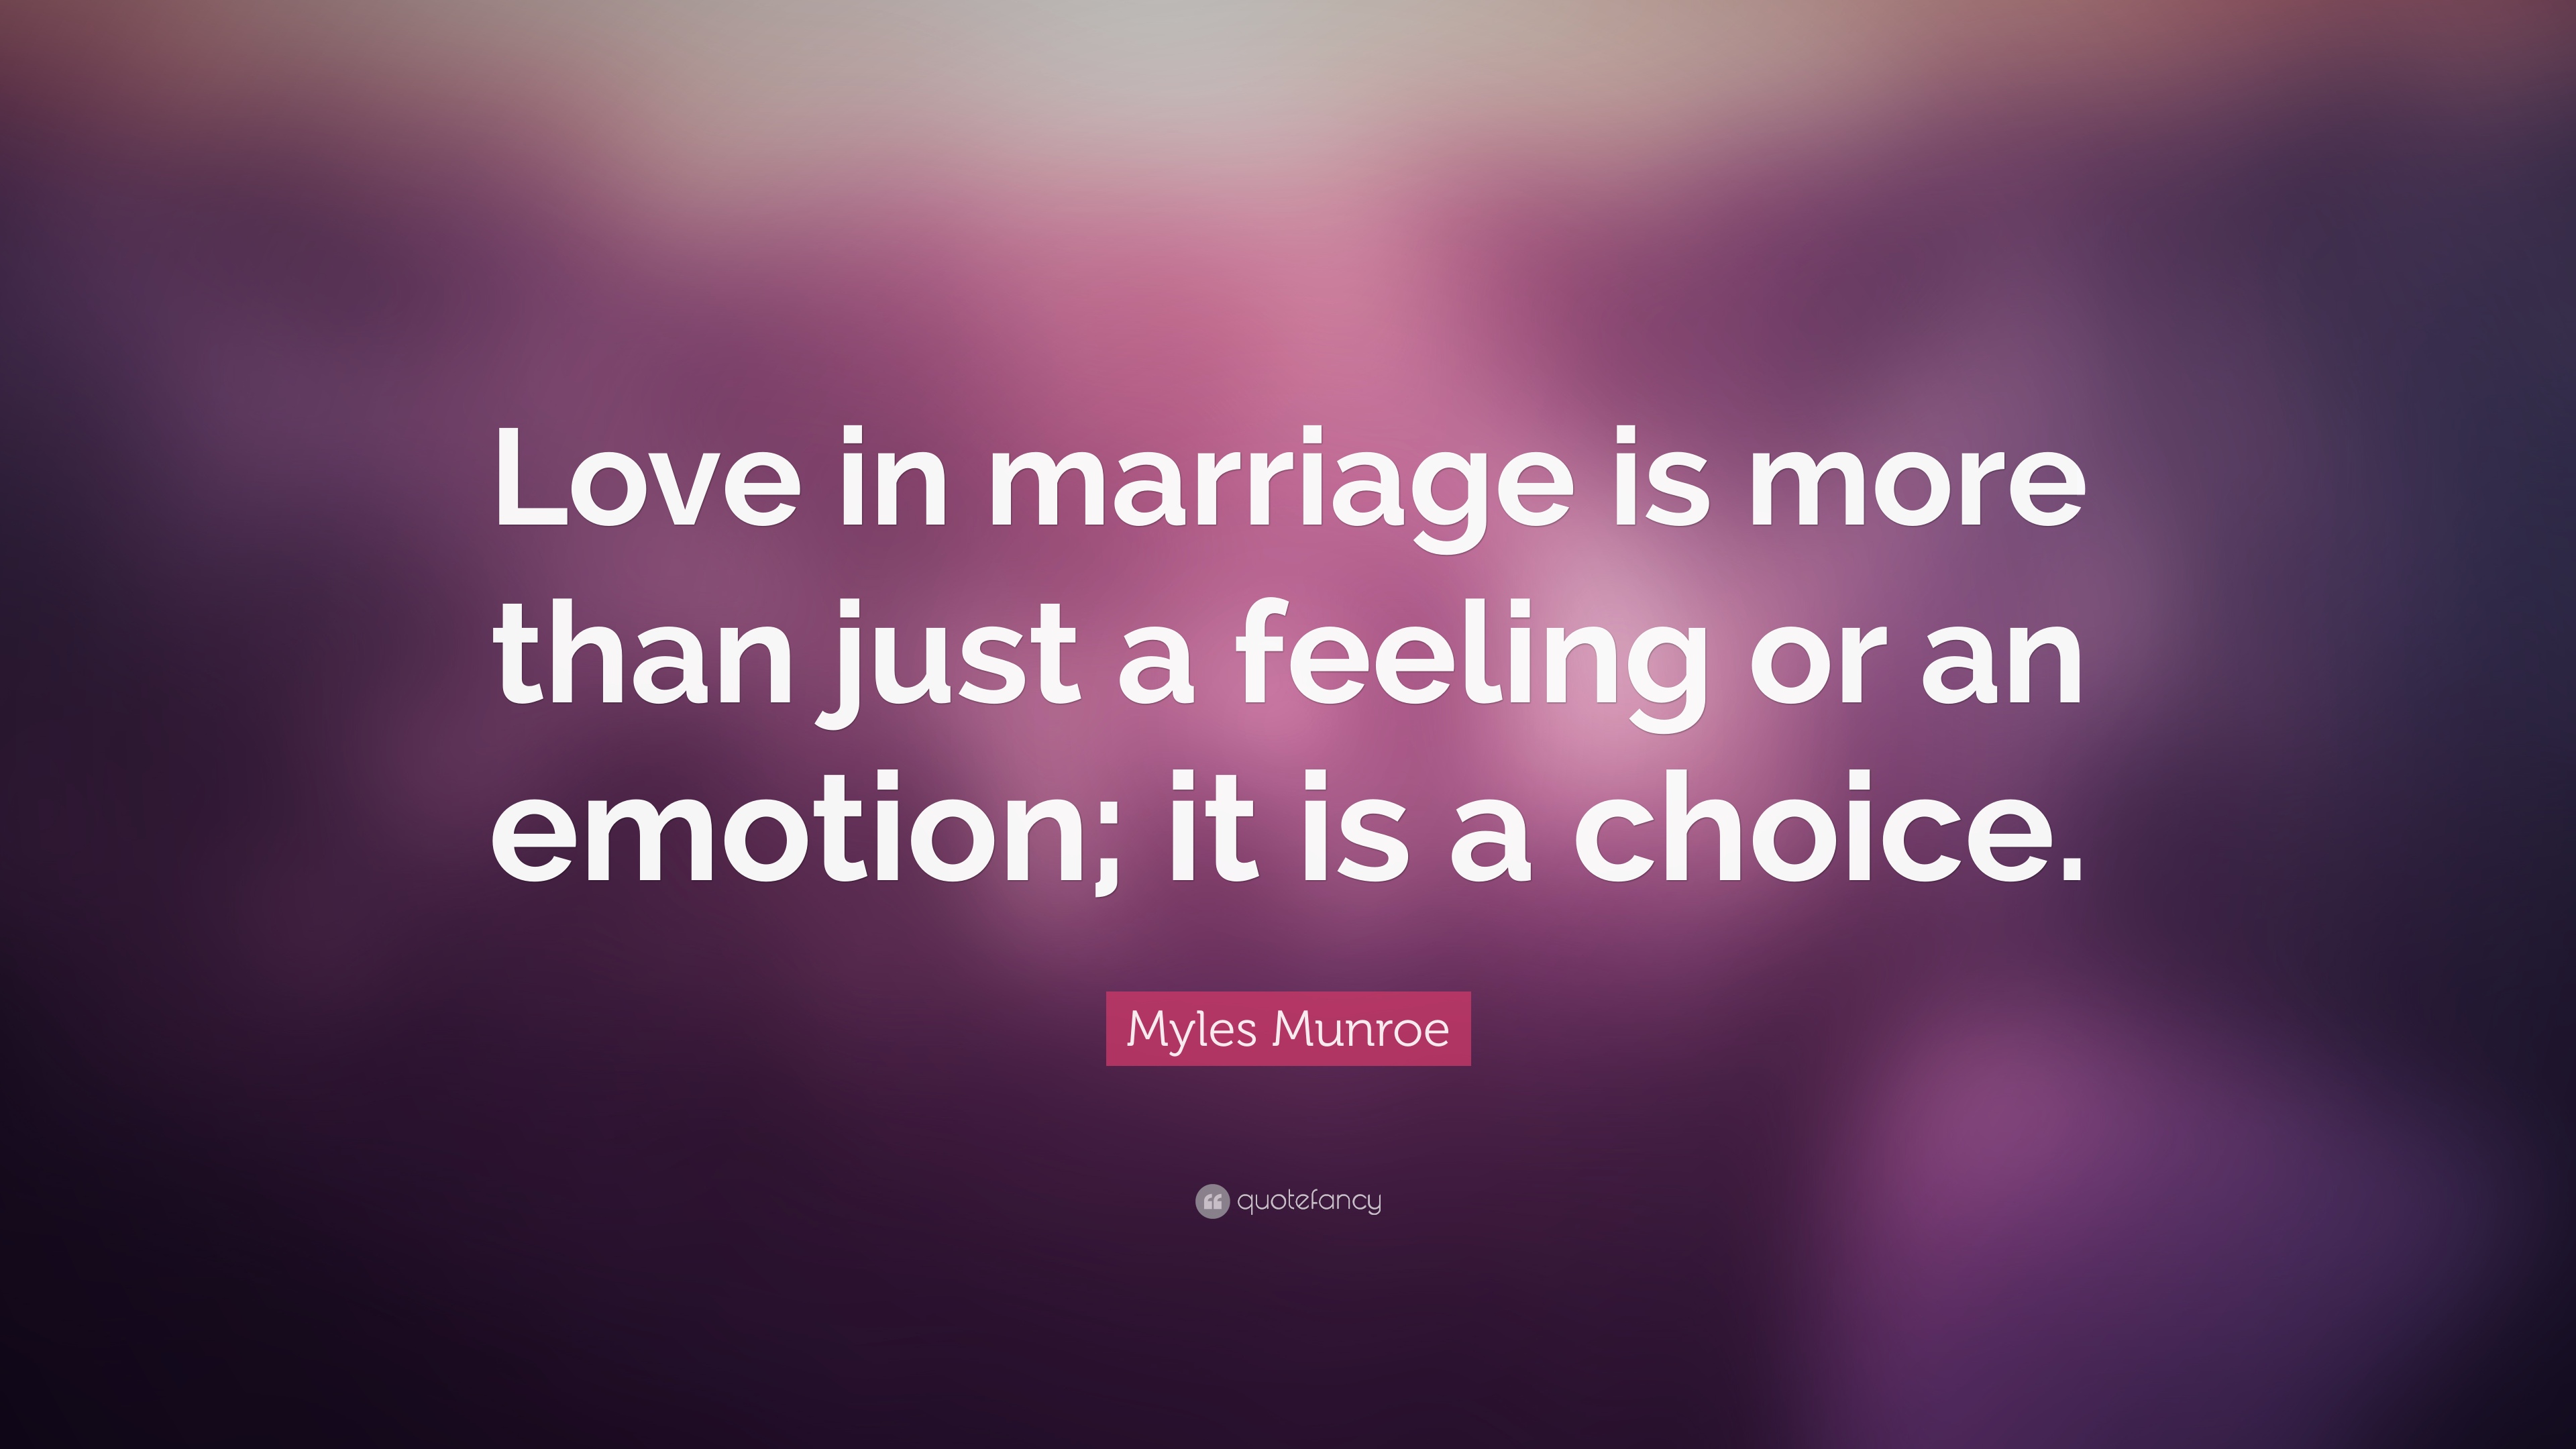 Myles Munroe Quote: “Love in marriage is more than just a feeling or ...